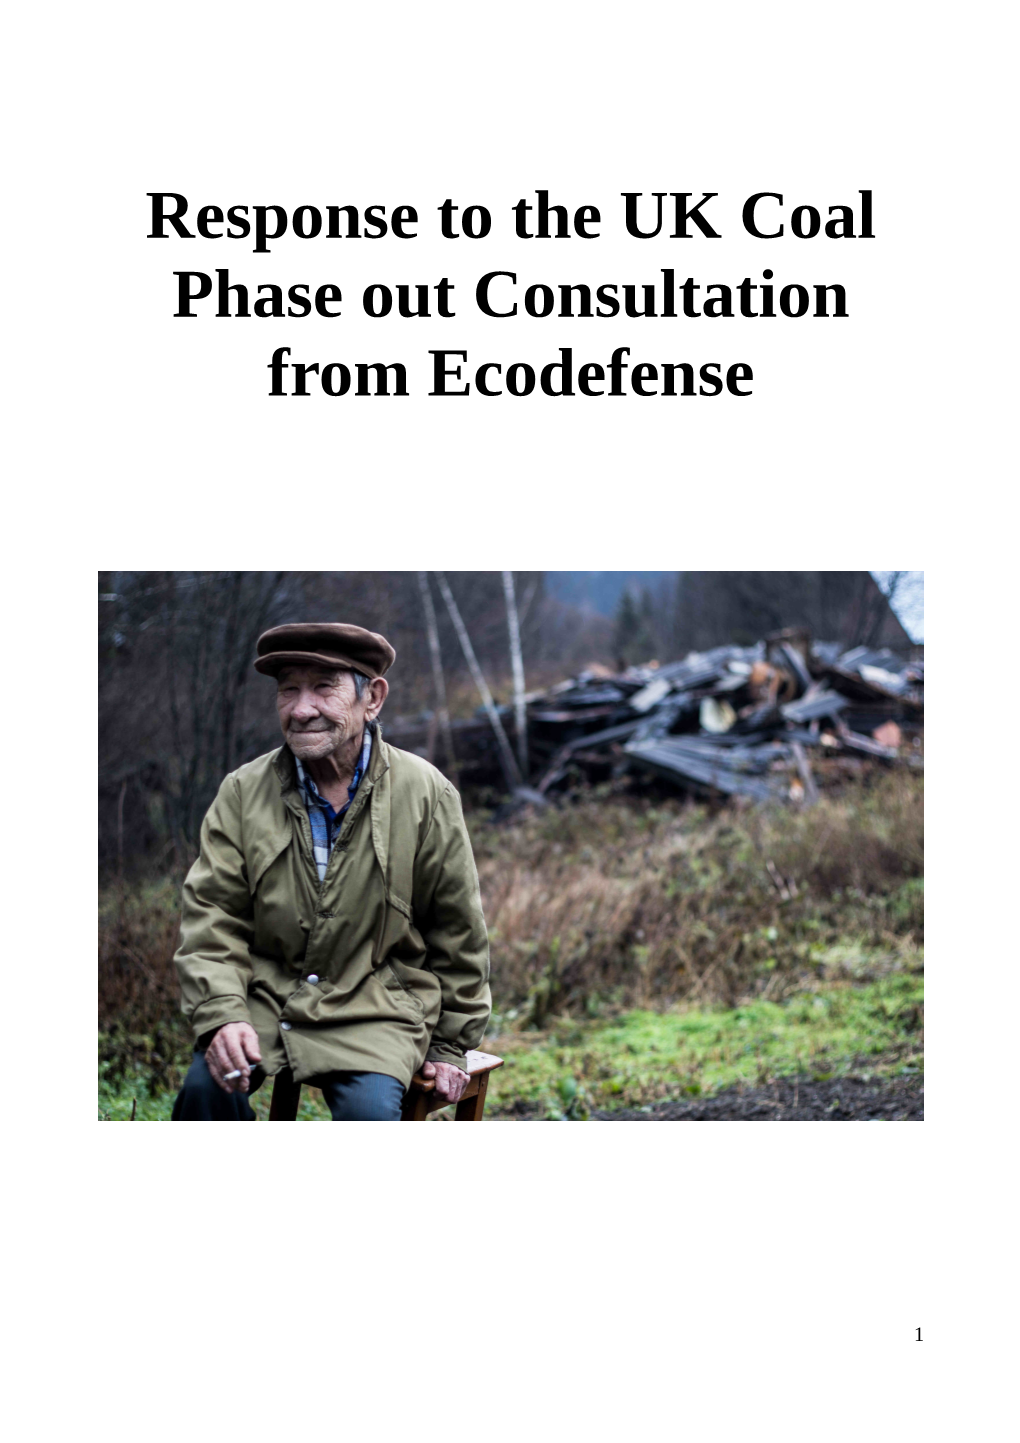 Response to the UK Coal Phase out Consultation from Ecodefense